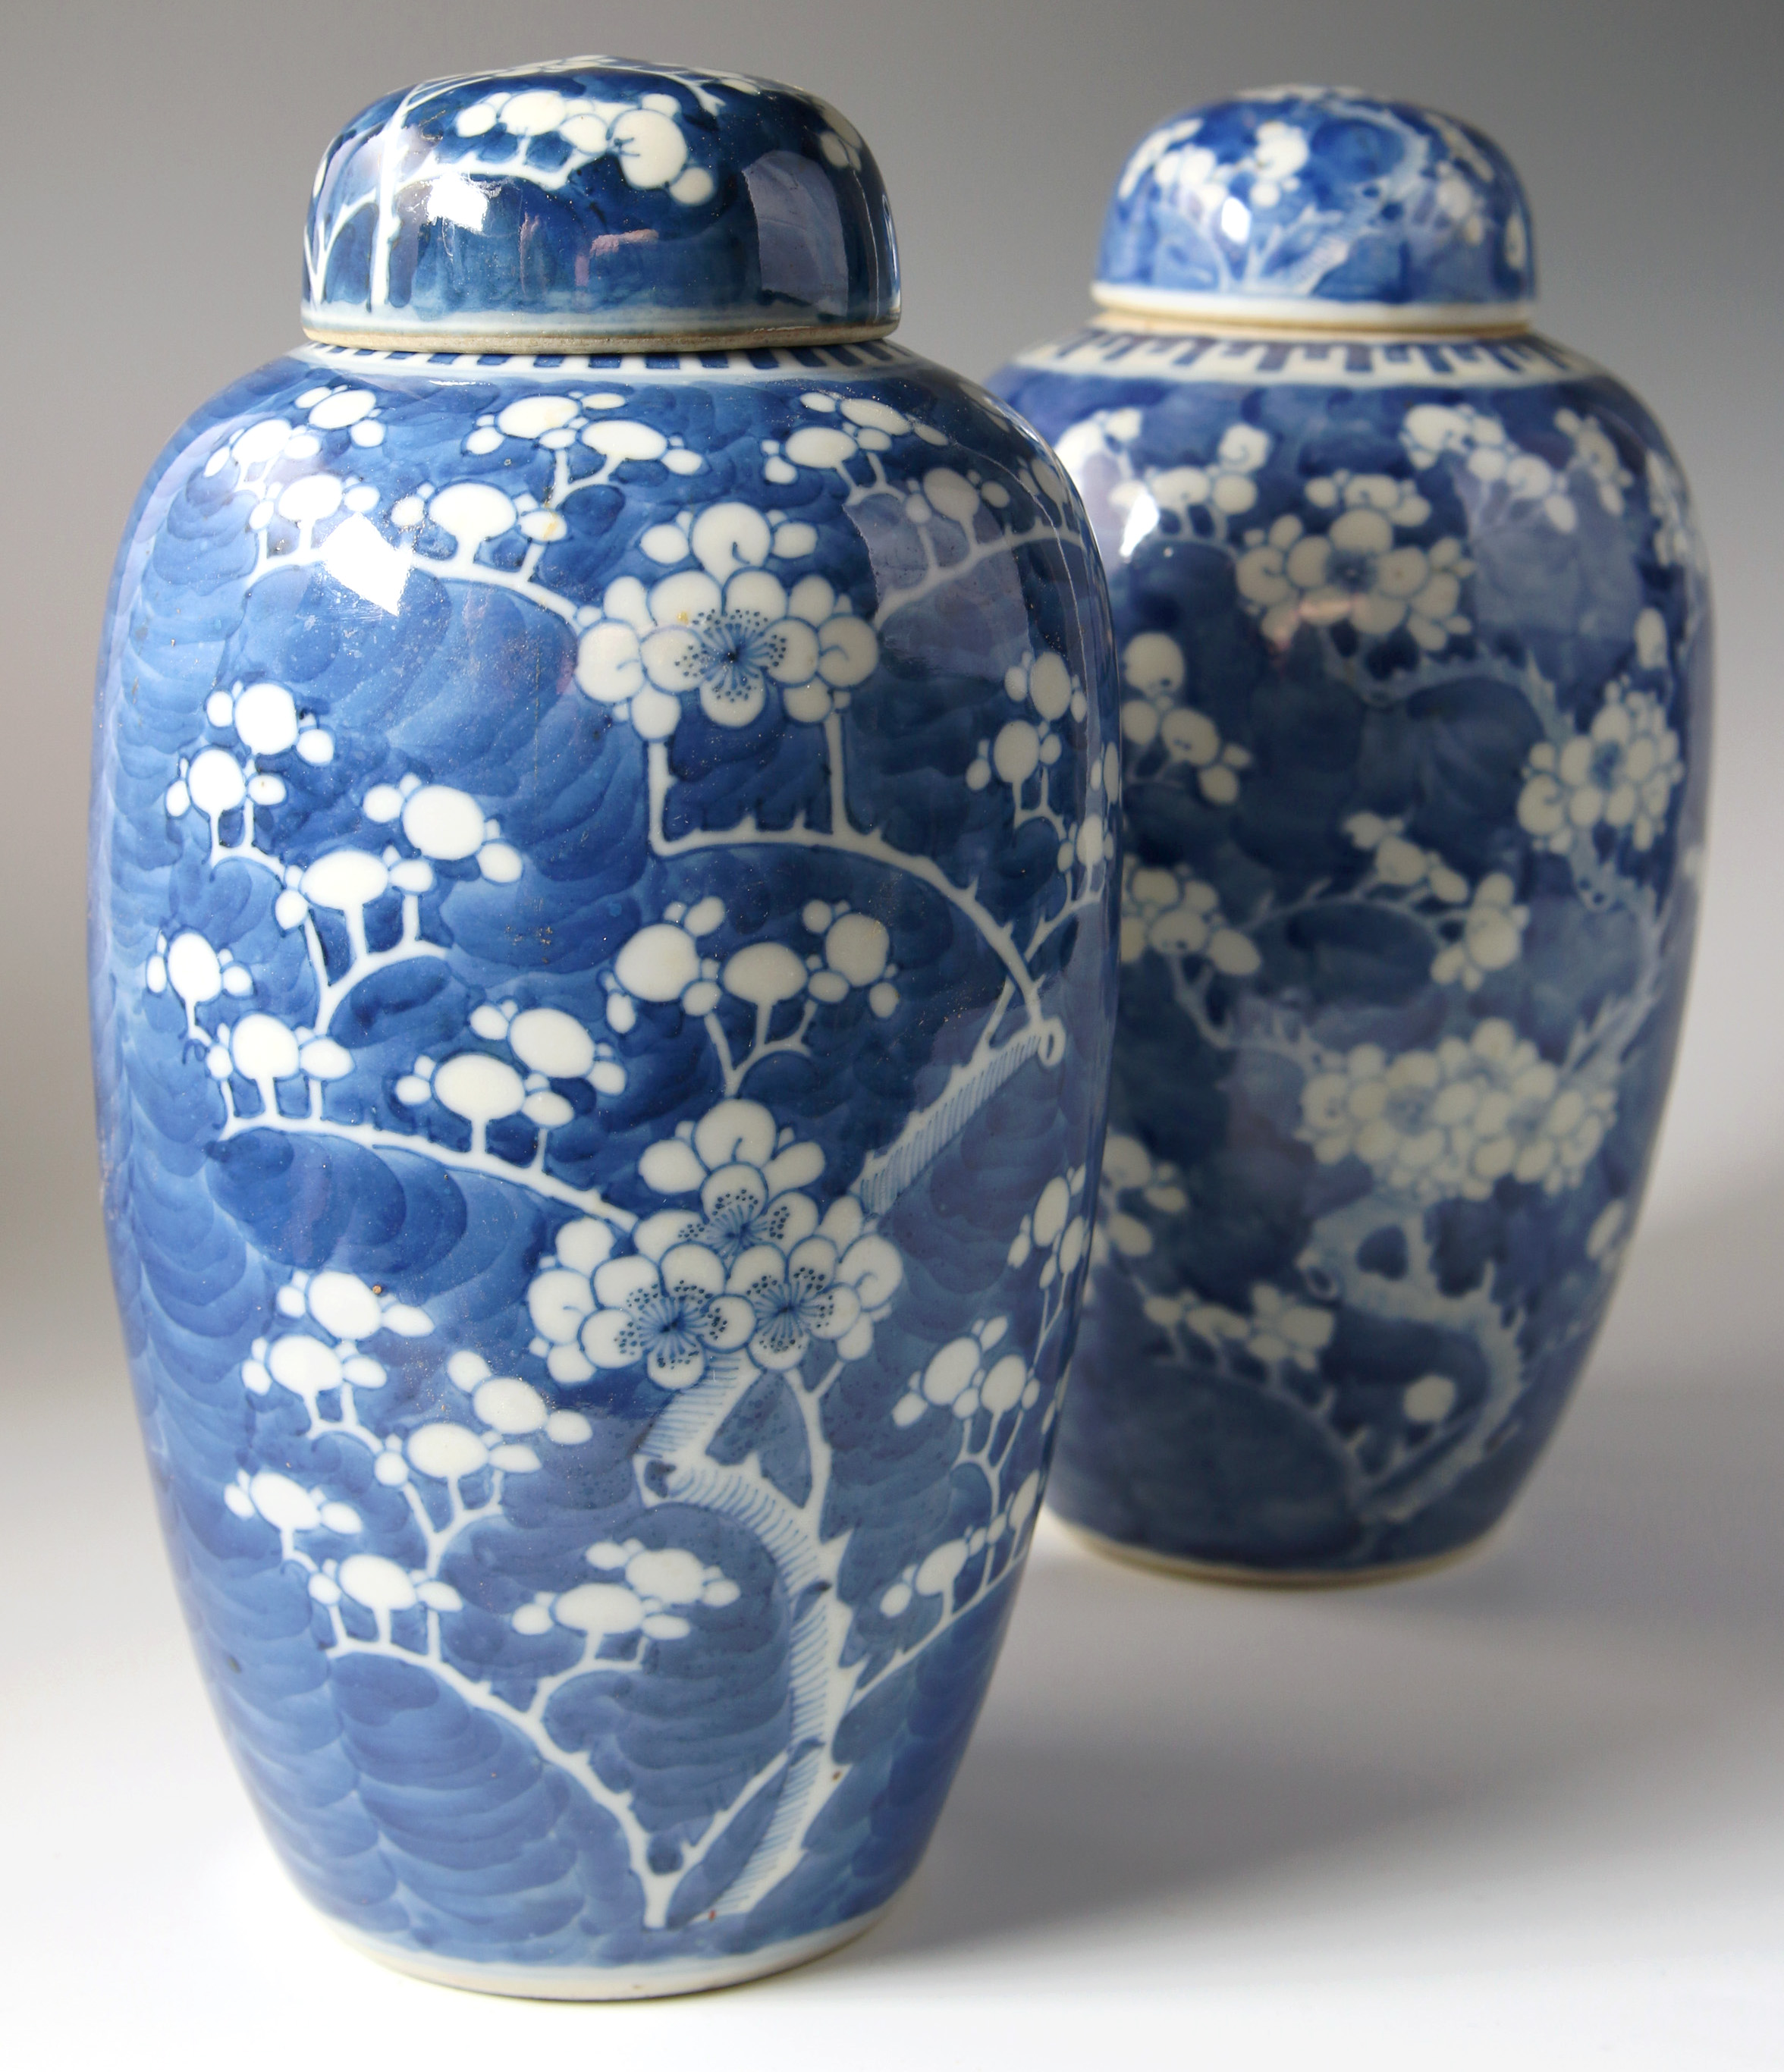 PAIR OF CHINESE COVERED PORCELAIN GINGER JARS